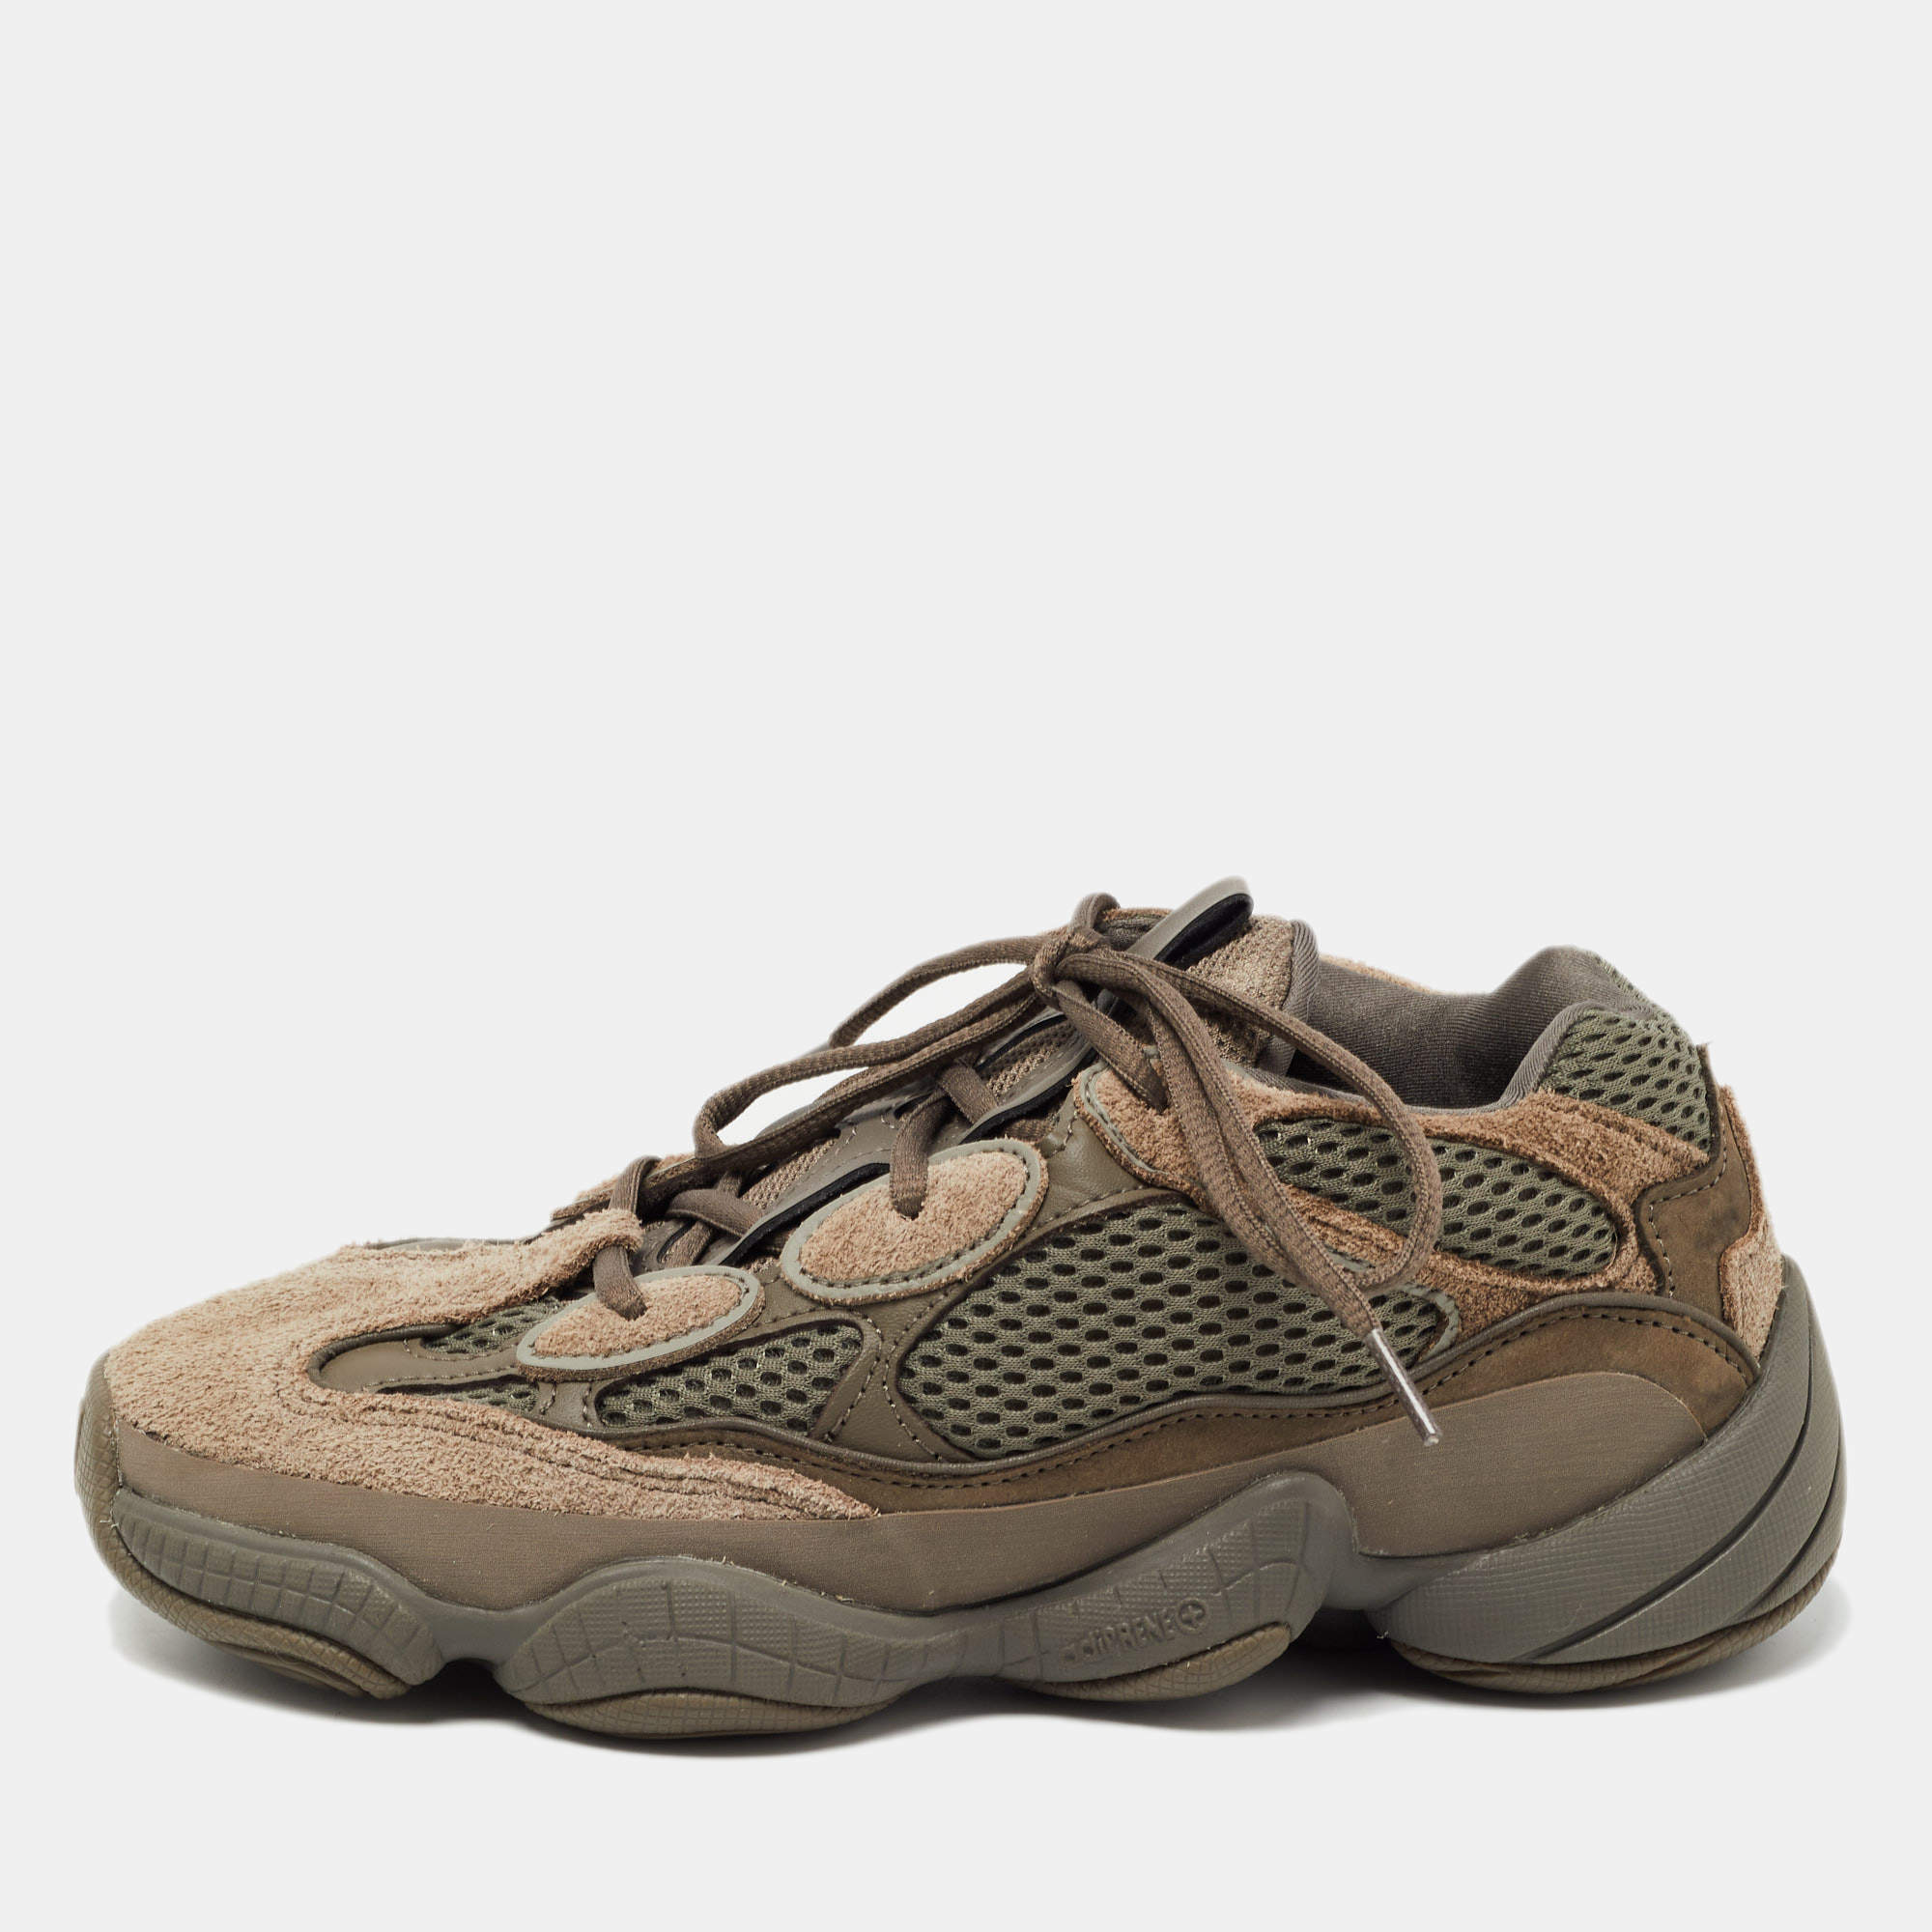 Yeezy x Adidas Brown/Grey Leather and Suede Yeezy 500 Clay